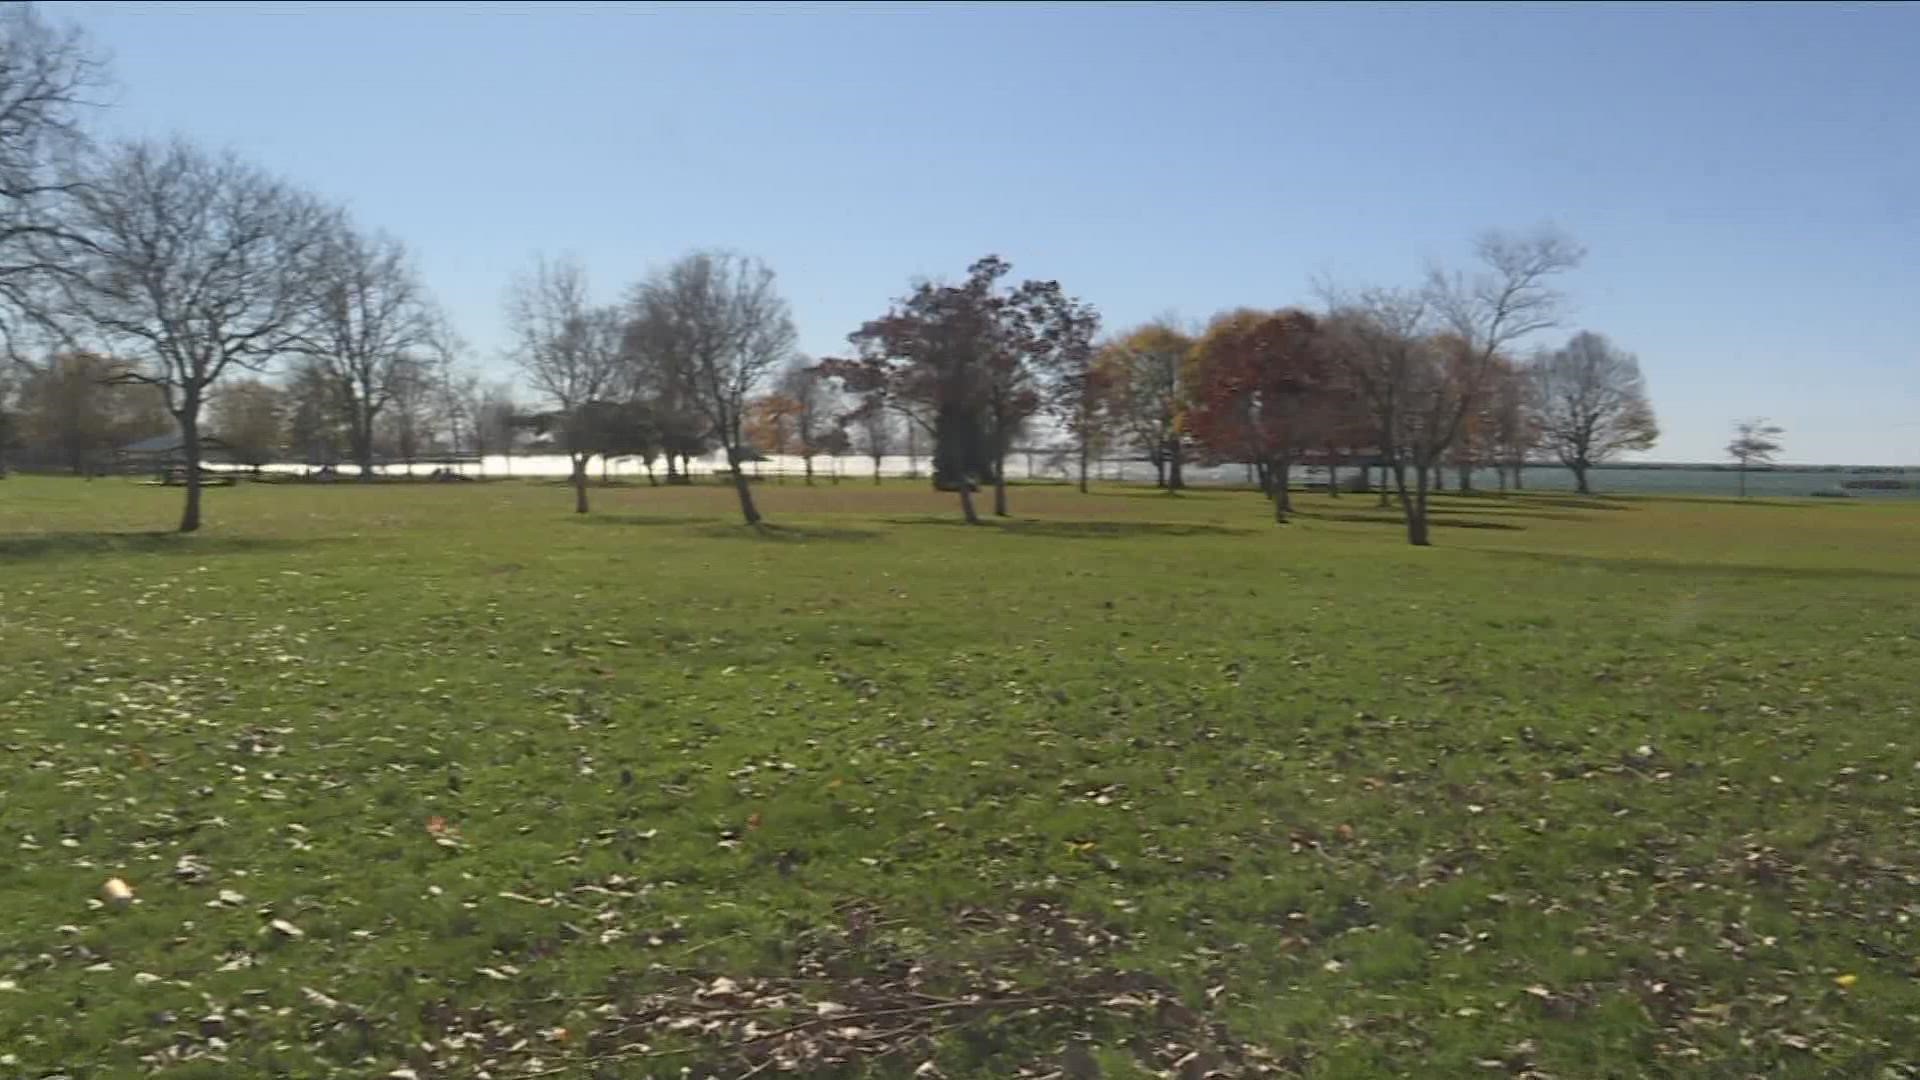 More than 26-hundred new trees will eventually be planted at the park.